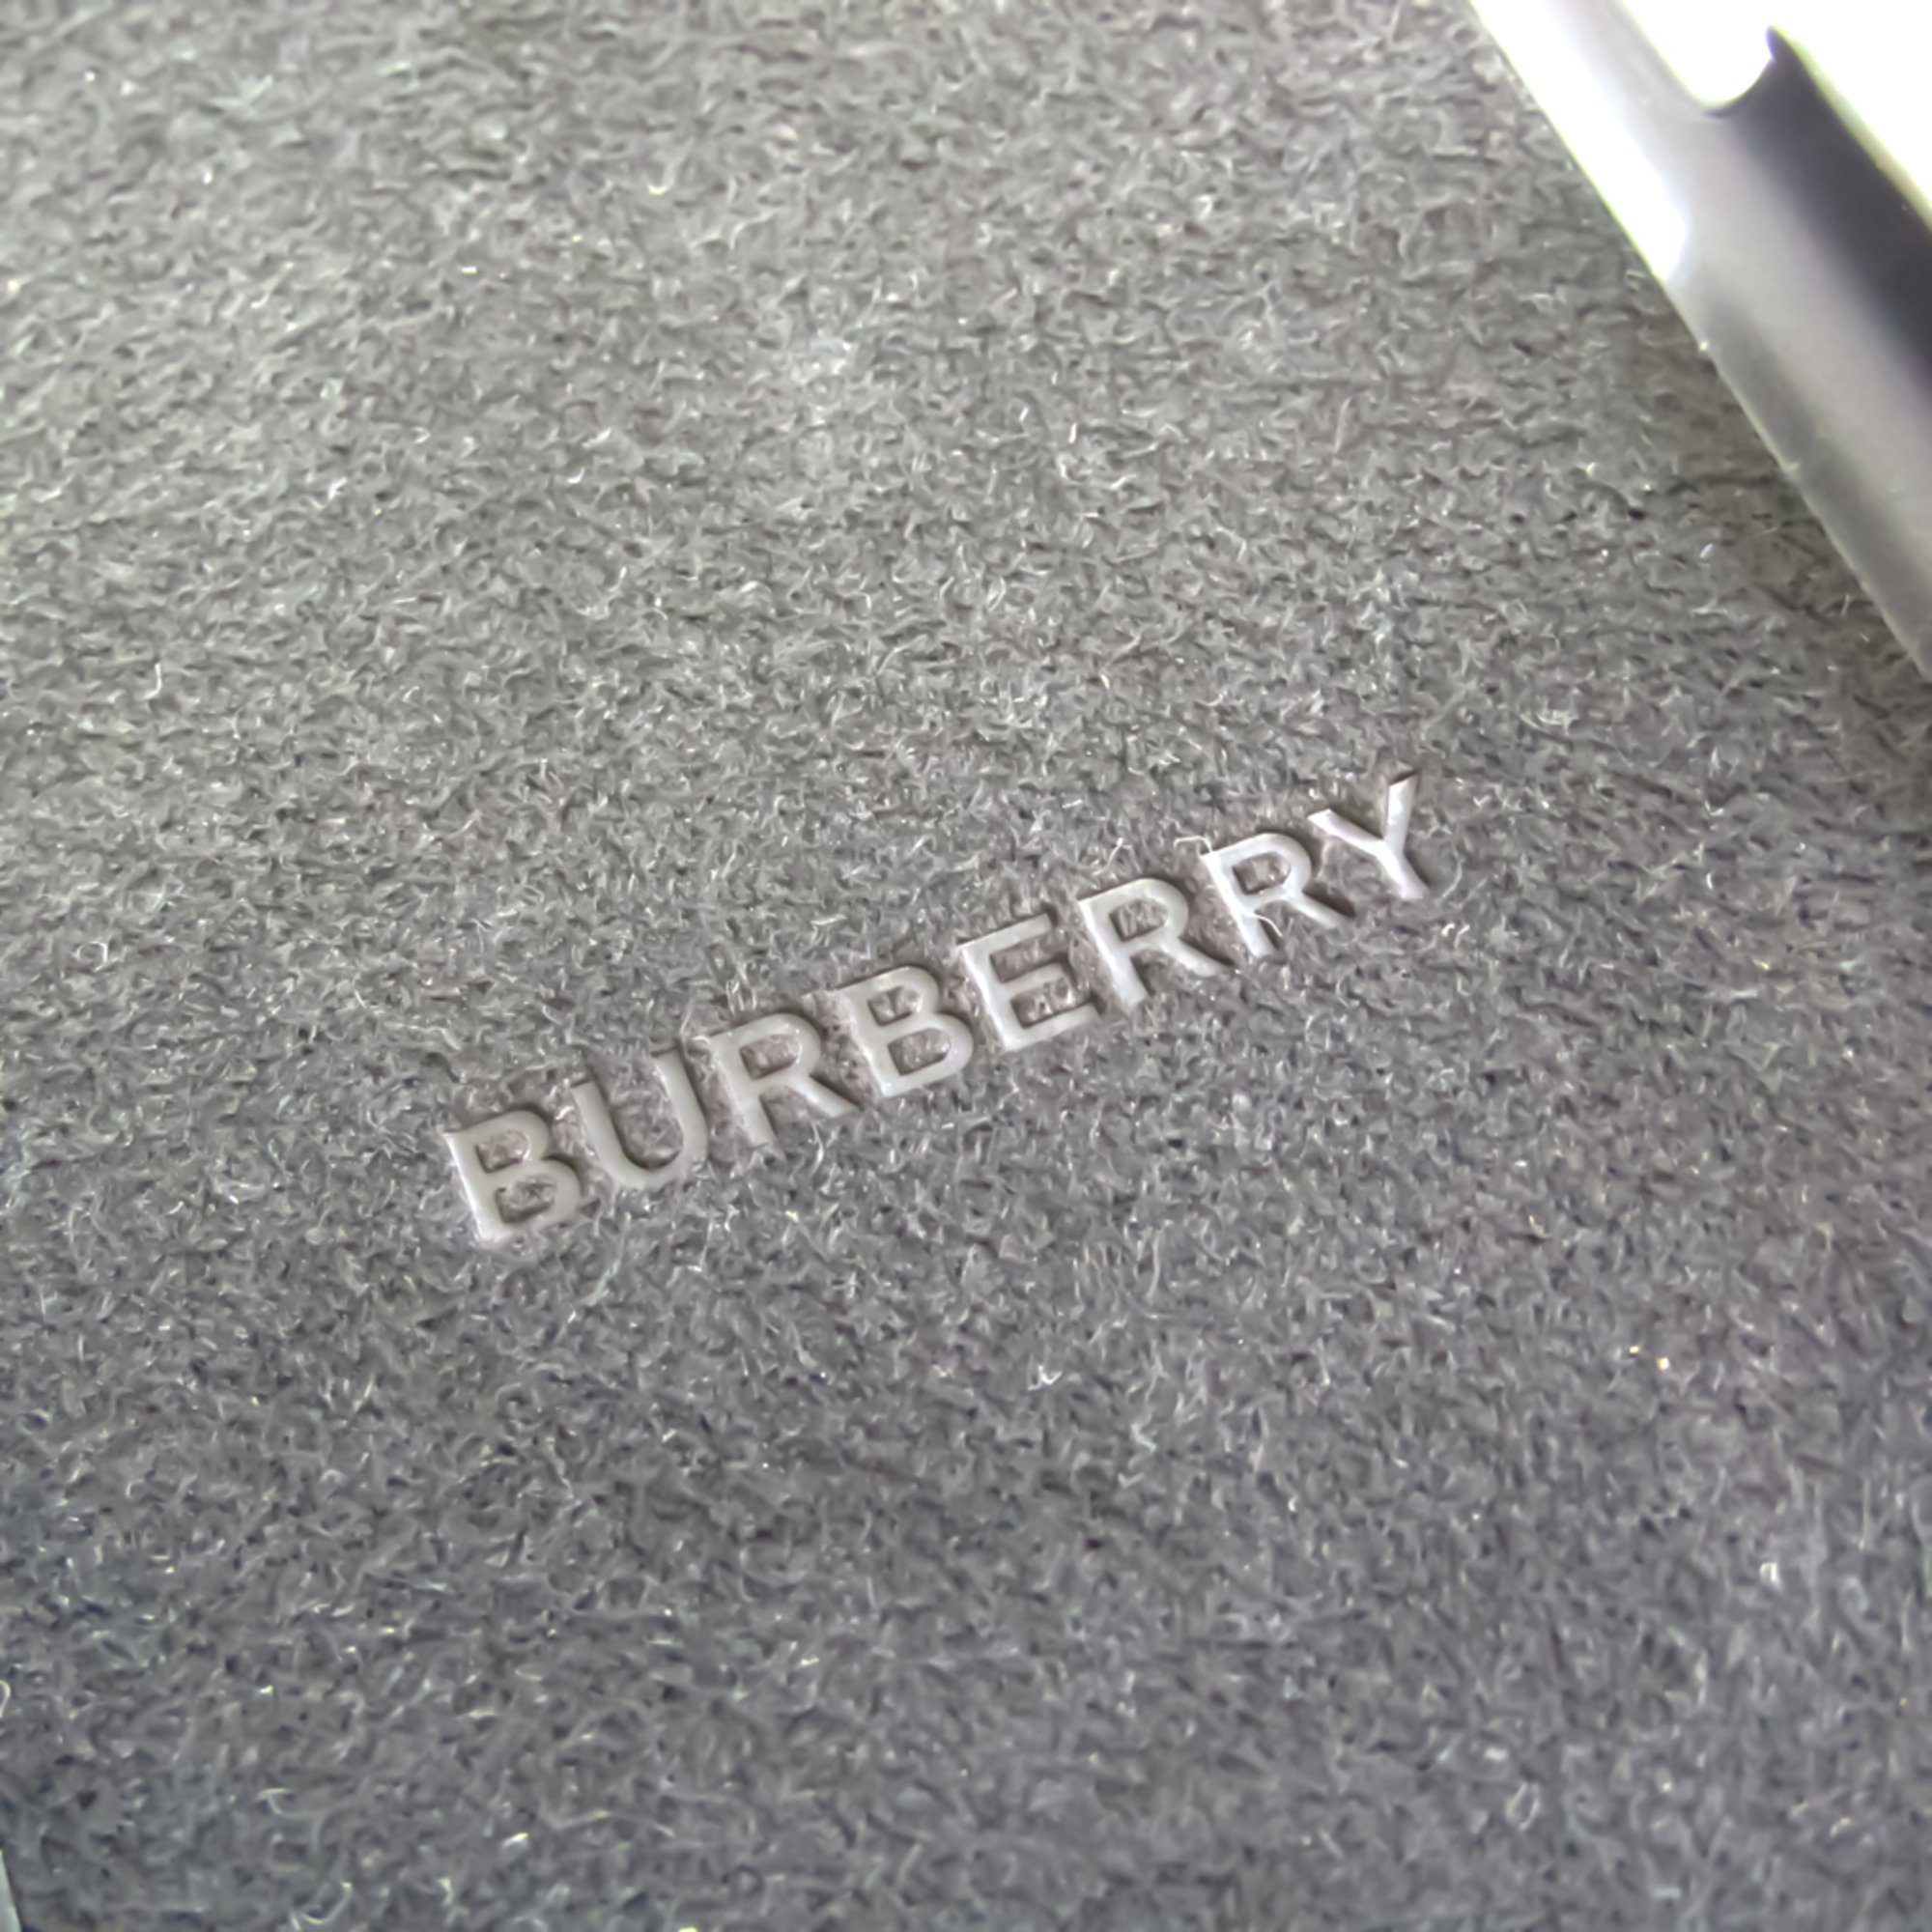 Burberry Leather Phone Bumper For IPhone X Black TB coin logo 8021771